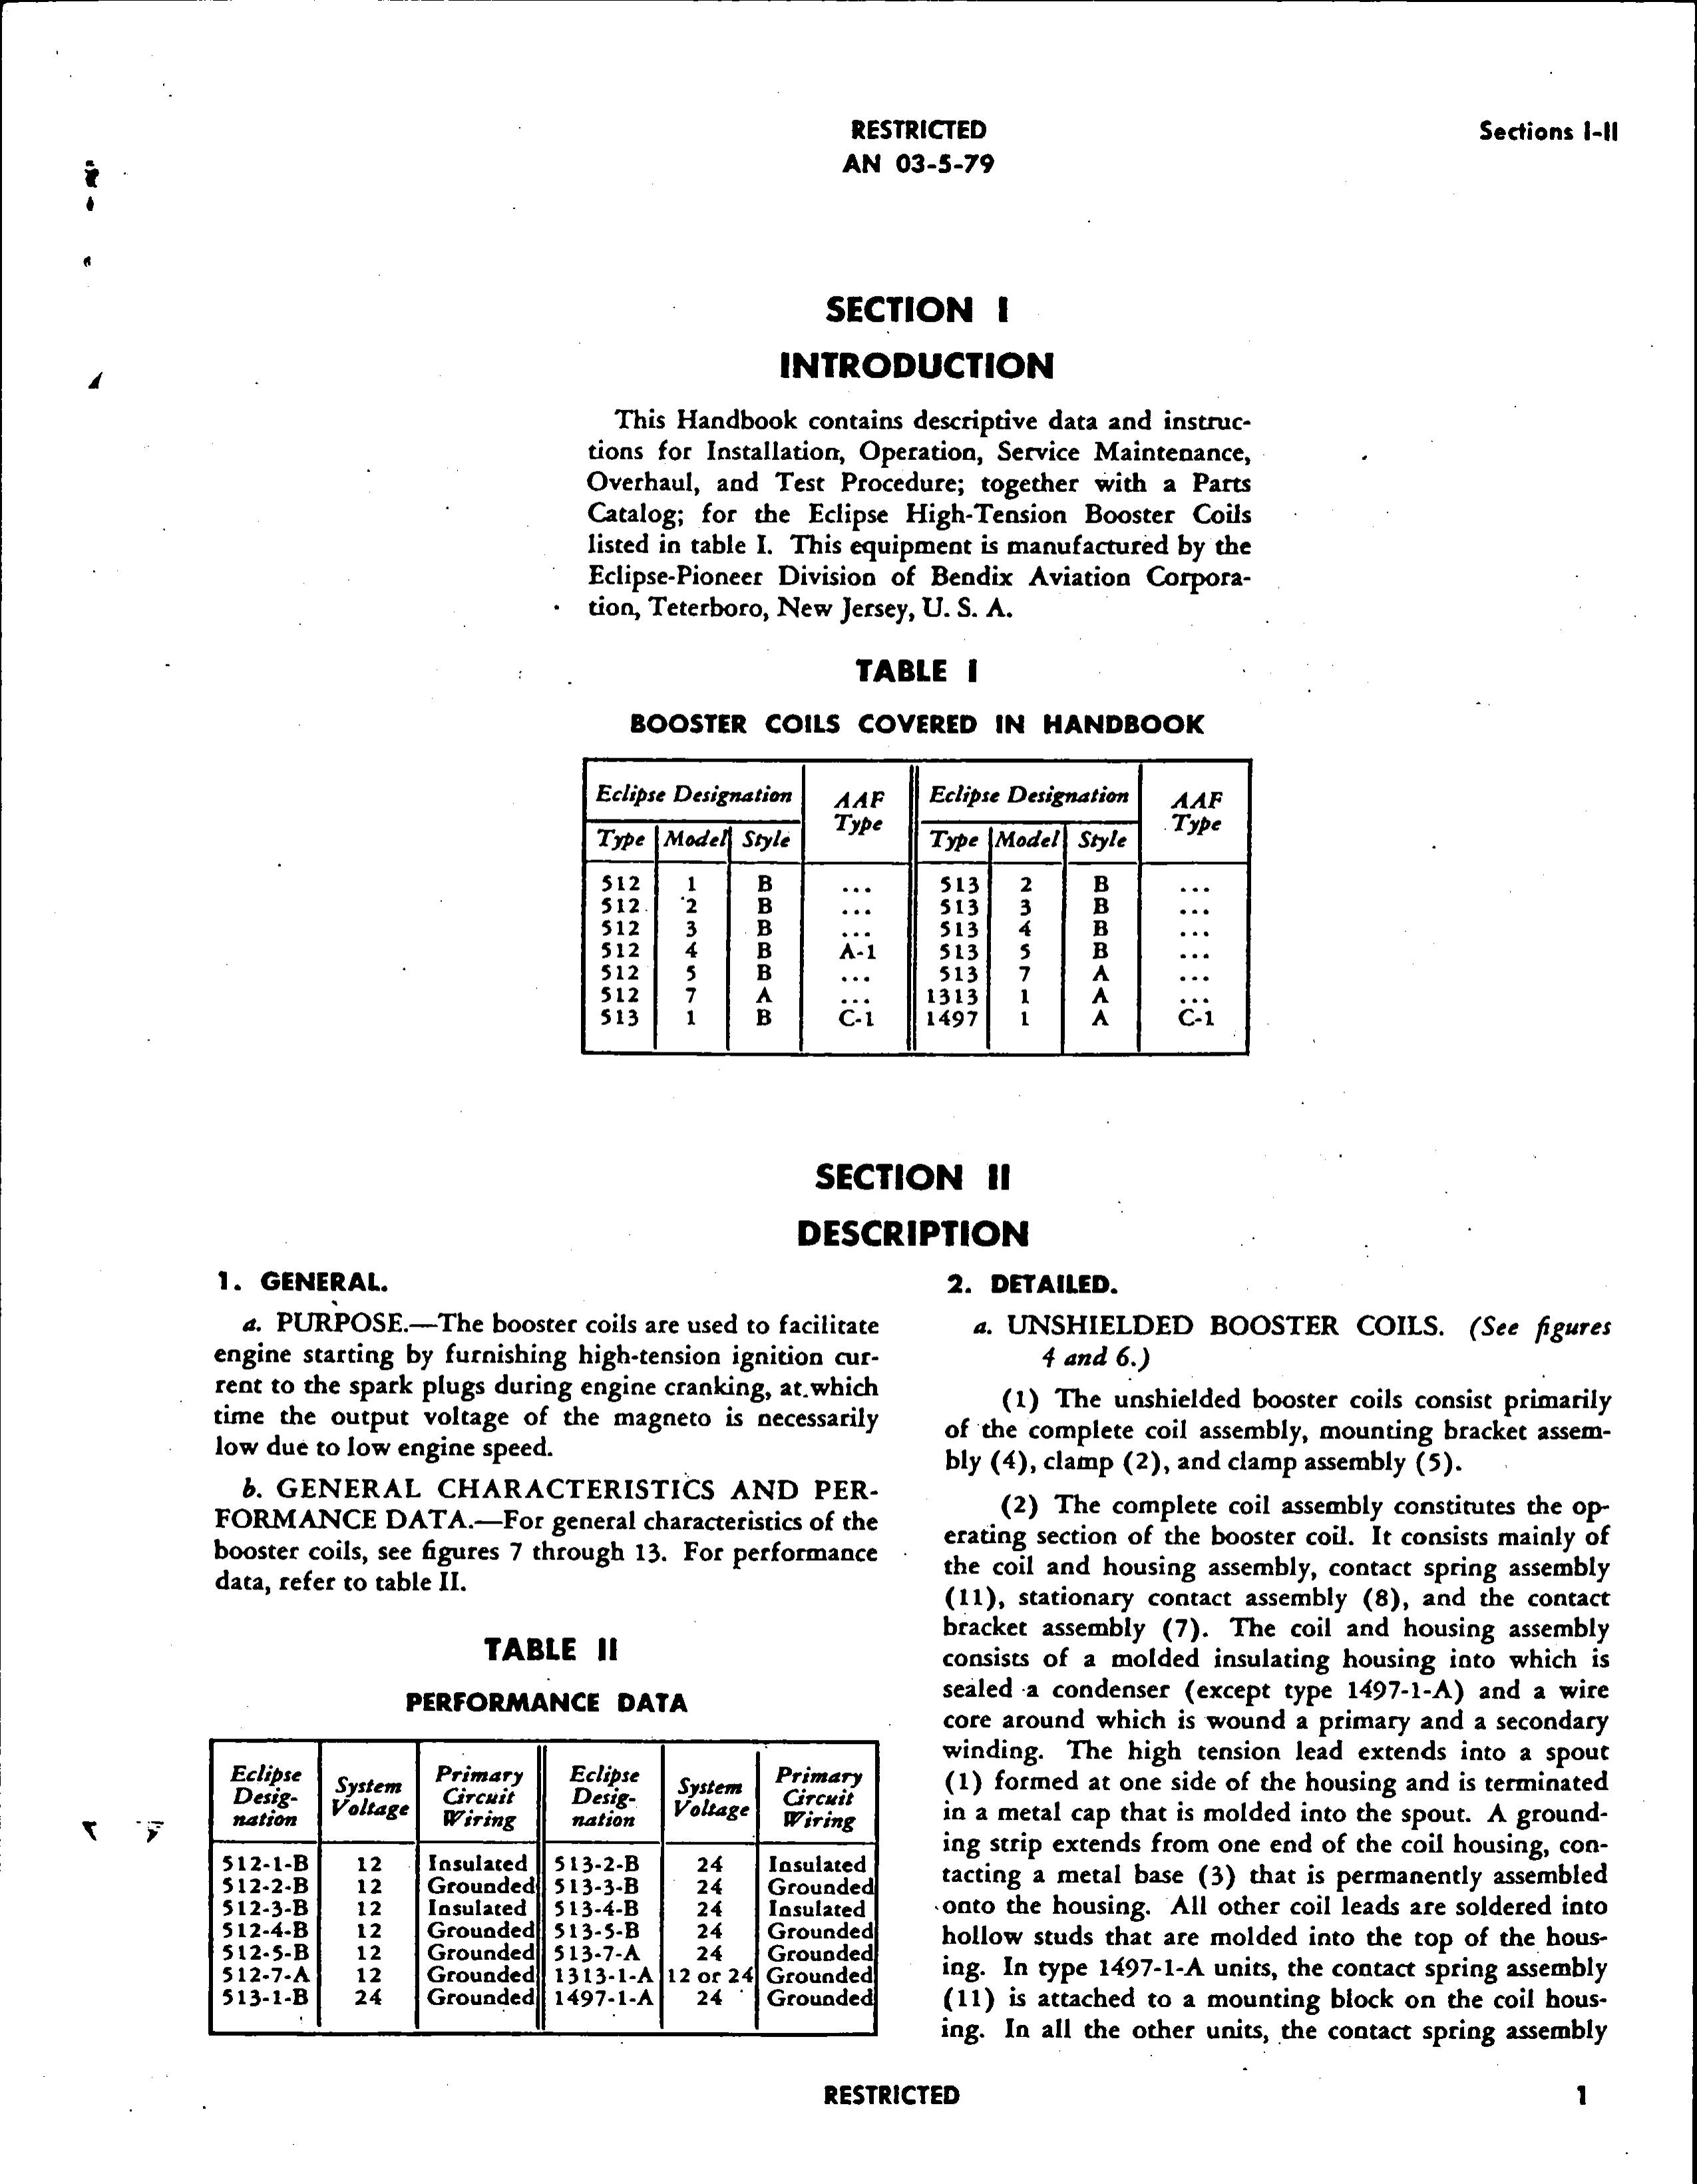 Sample page 5 from AirCorps Library document: Service and Instructions for High-Tension Booster Coils